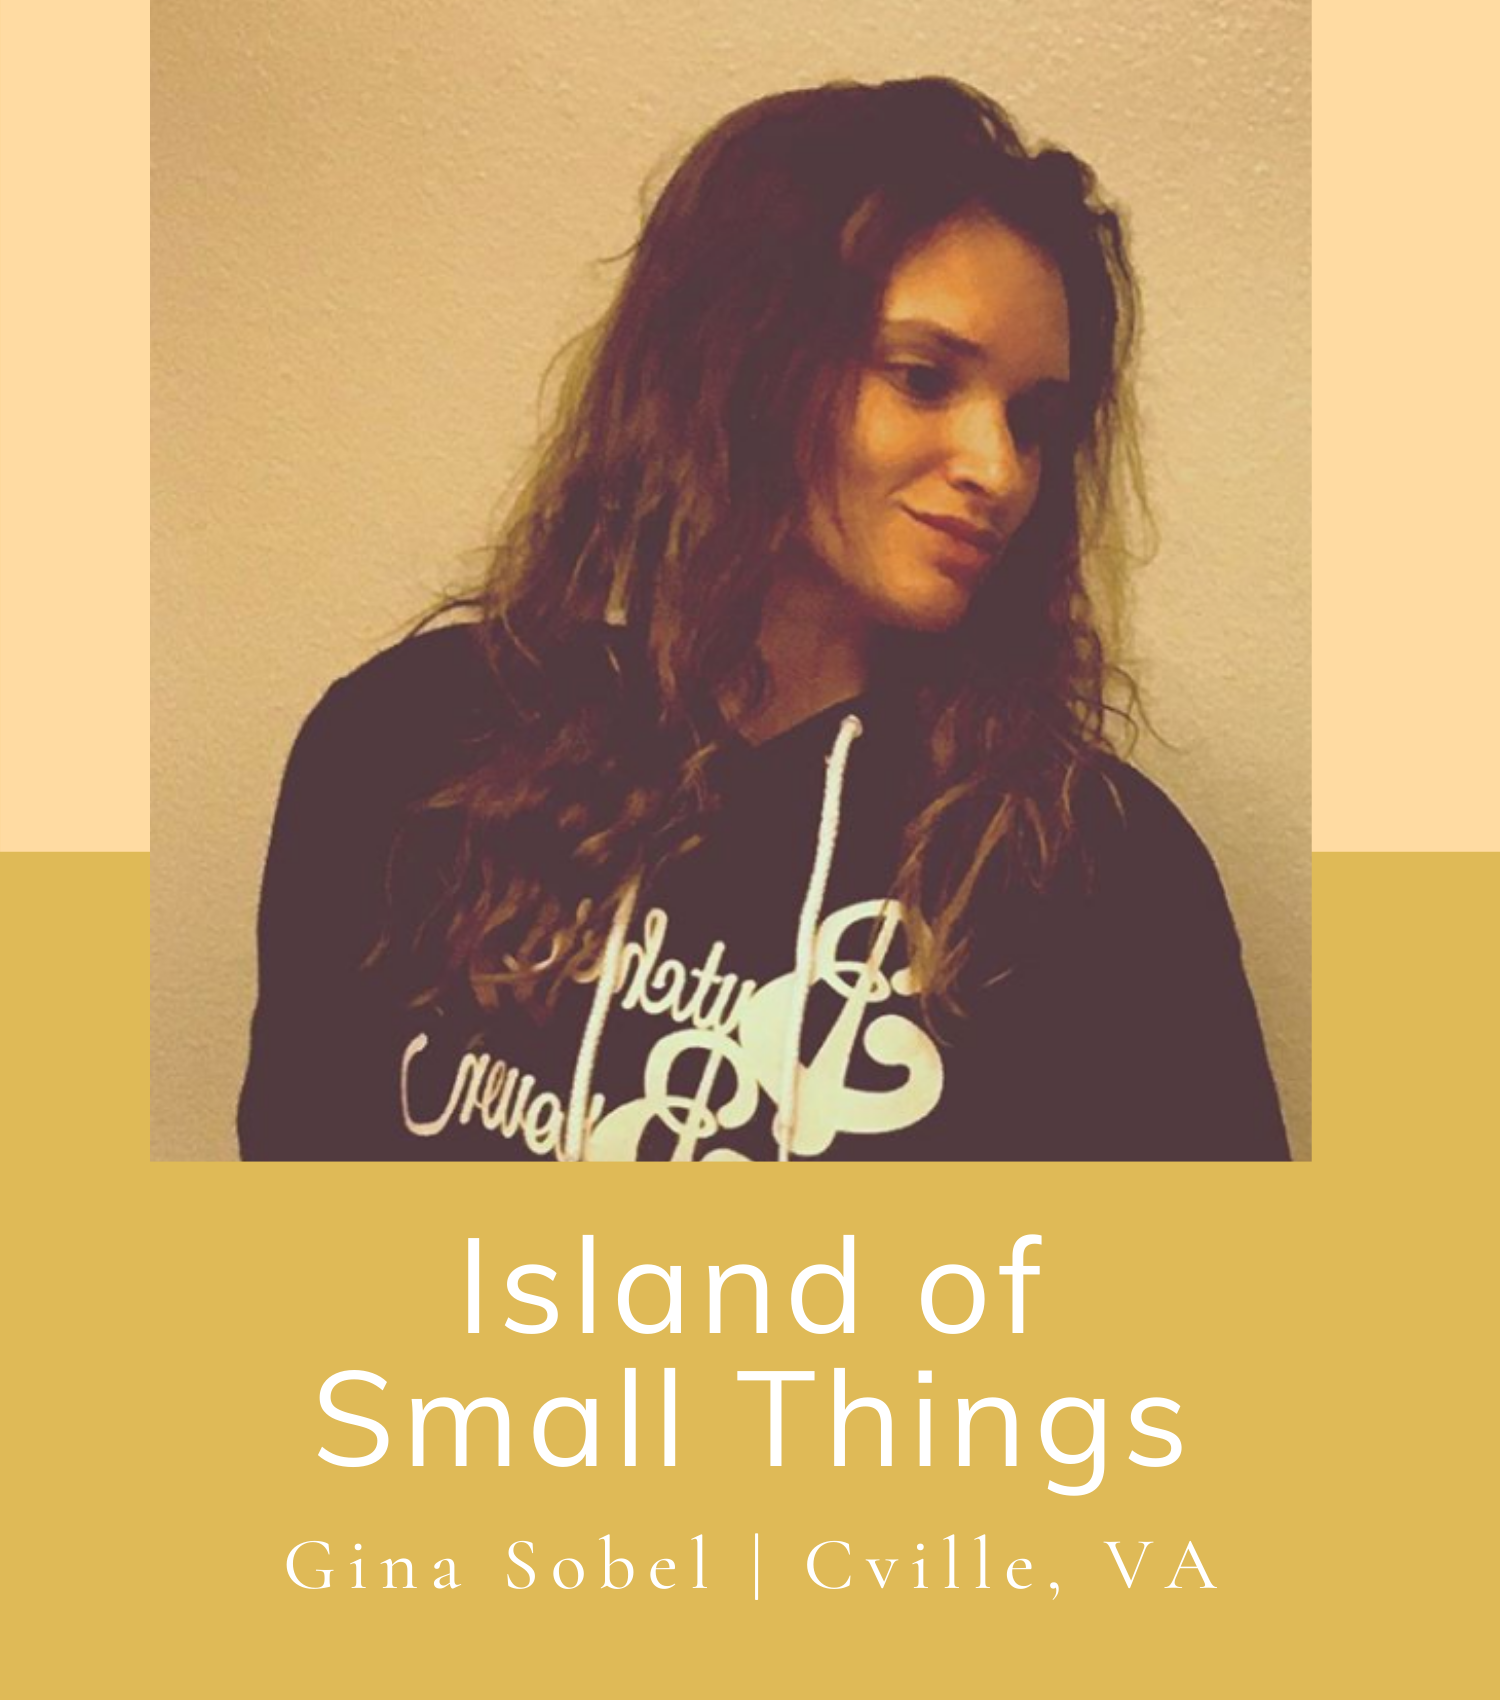 ISLAND OF SMALL THINGS